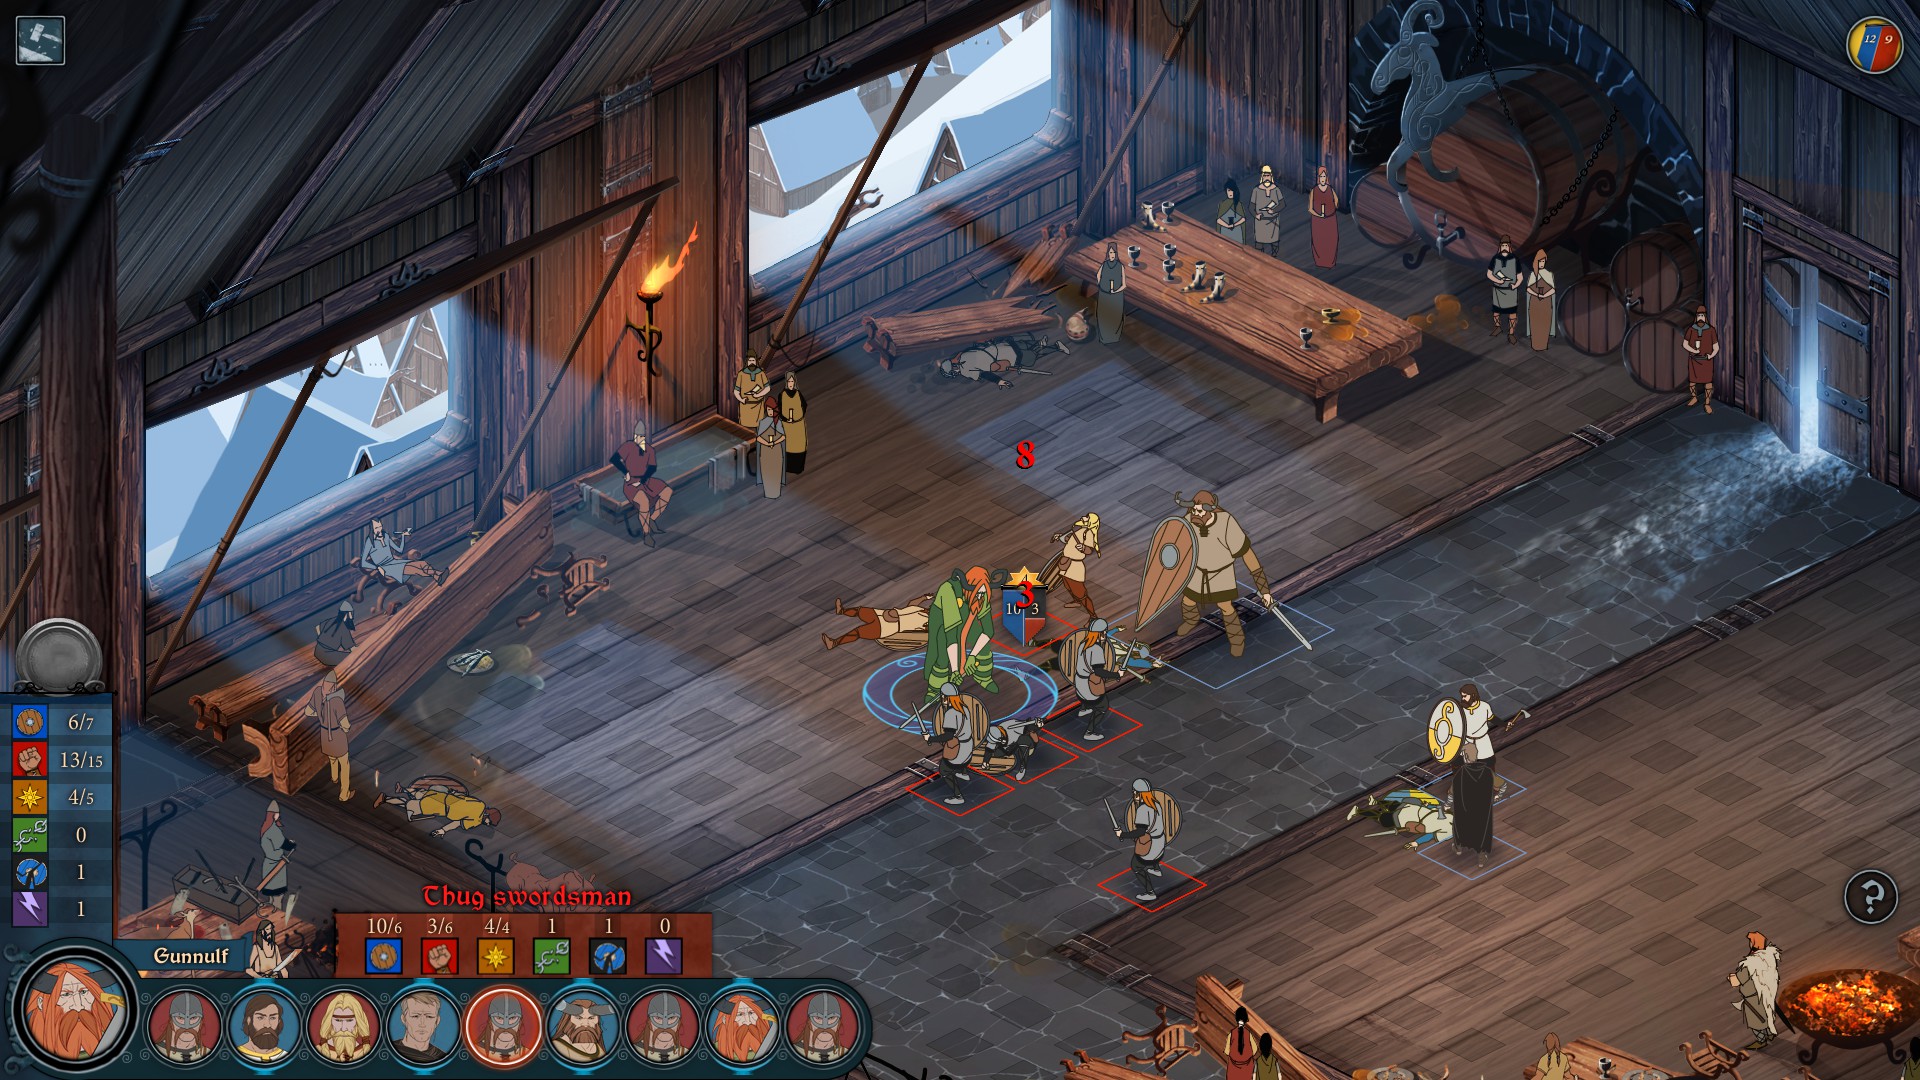 Tactical RPG The Banner Saga is due for release on tablets this September